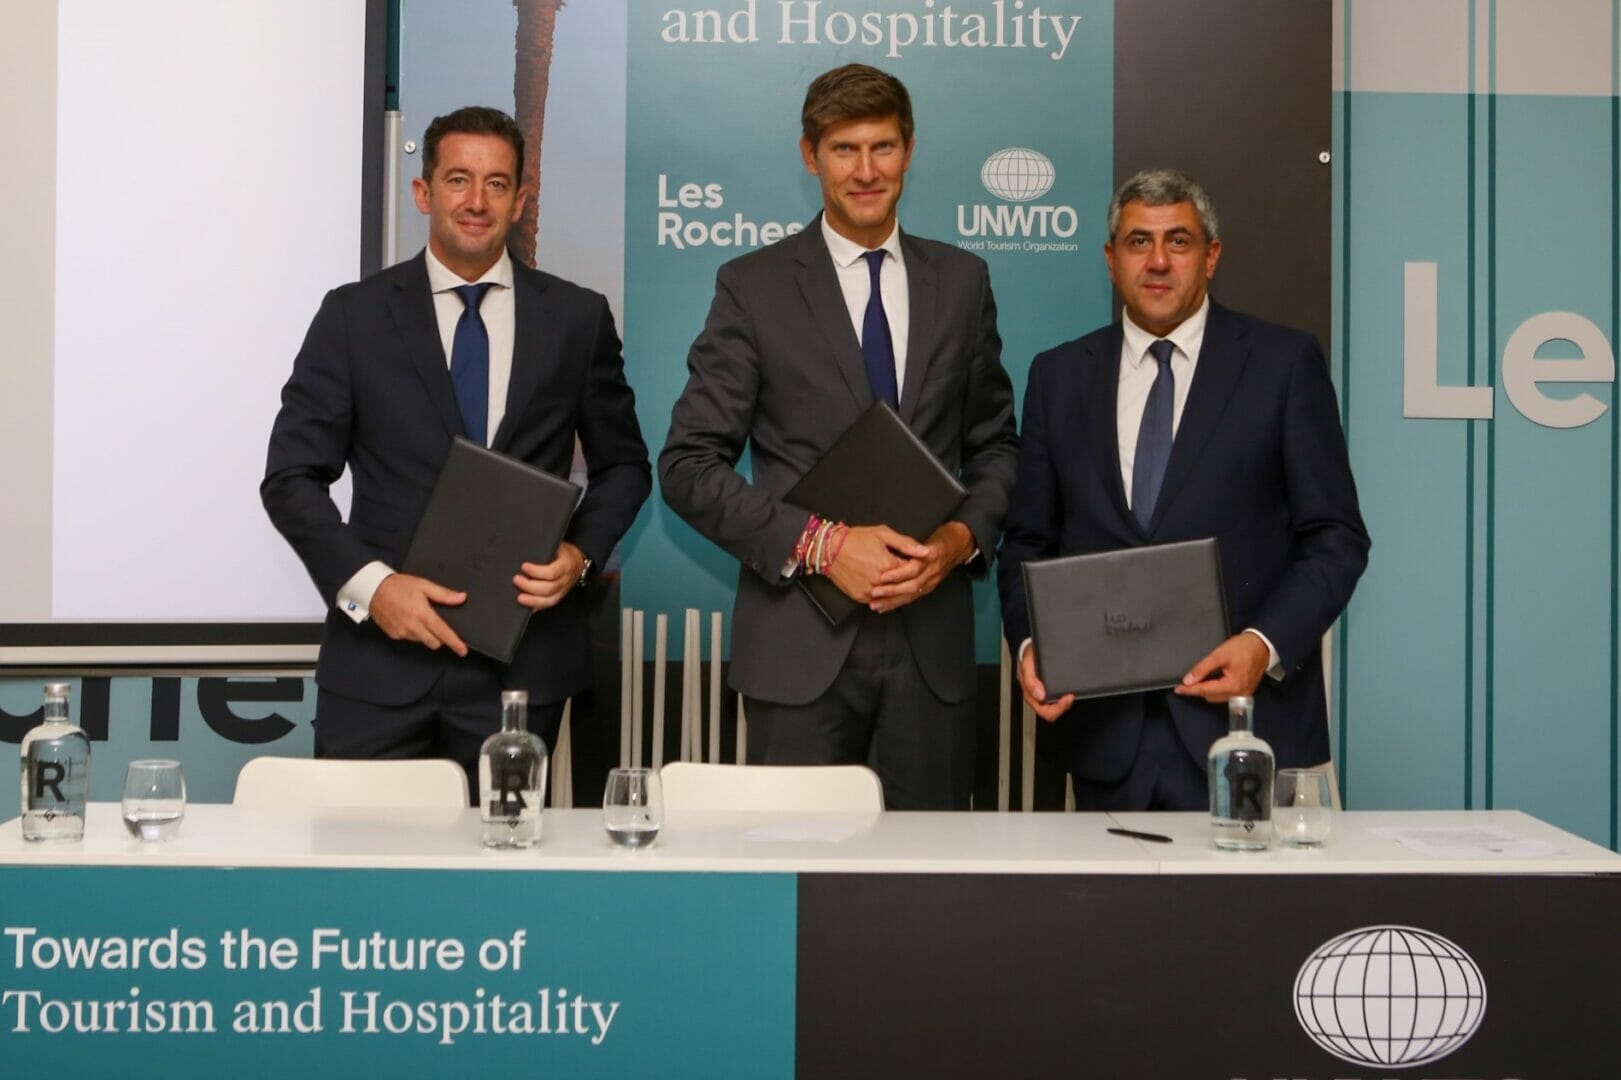 Les Roches in elite of hospitality management education with a new agreement with UNWTO and expansion of its Marbella campus